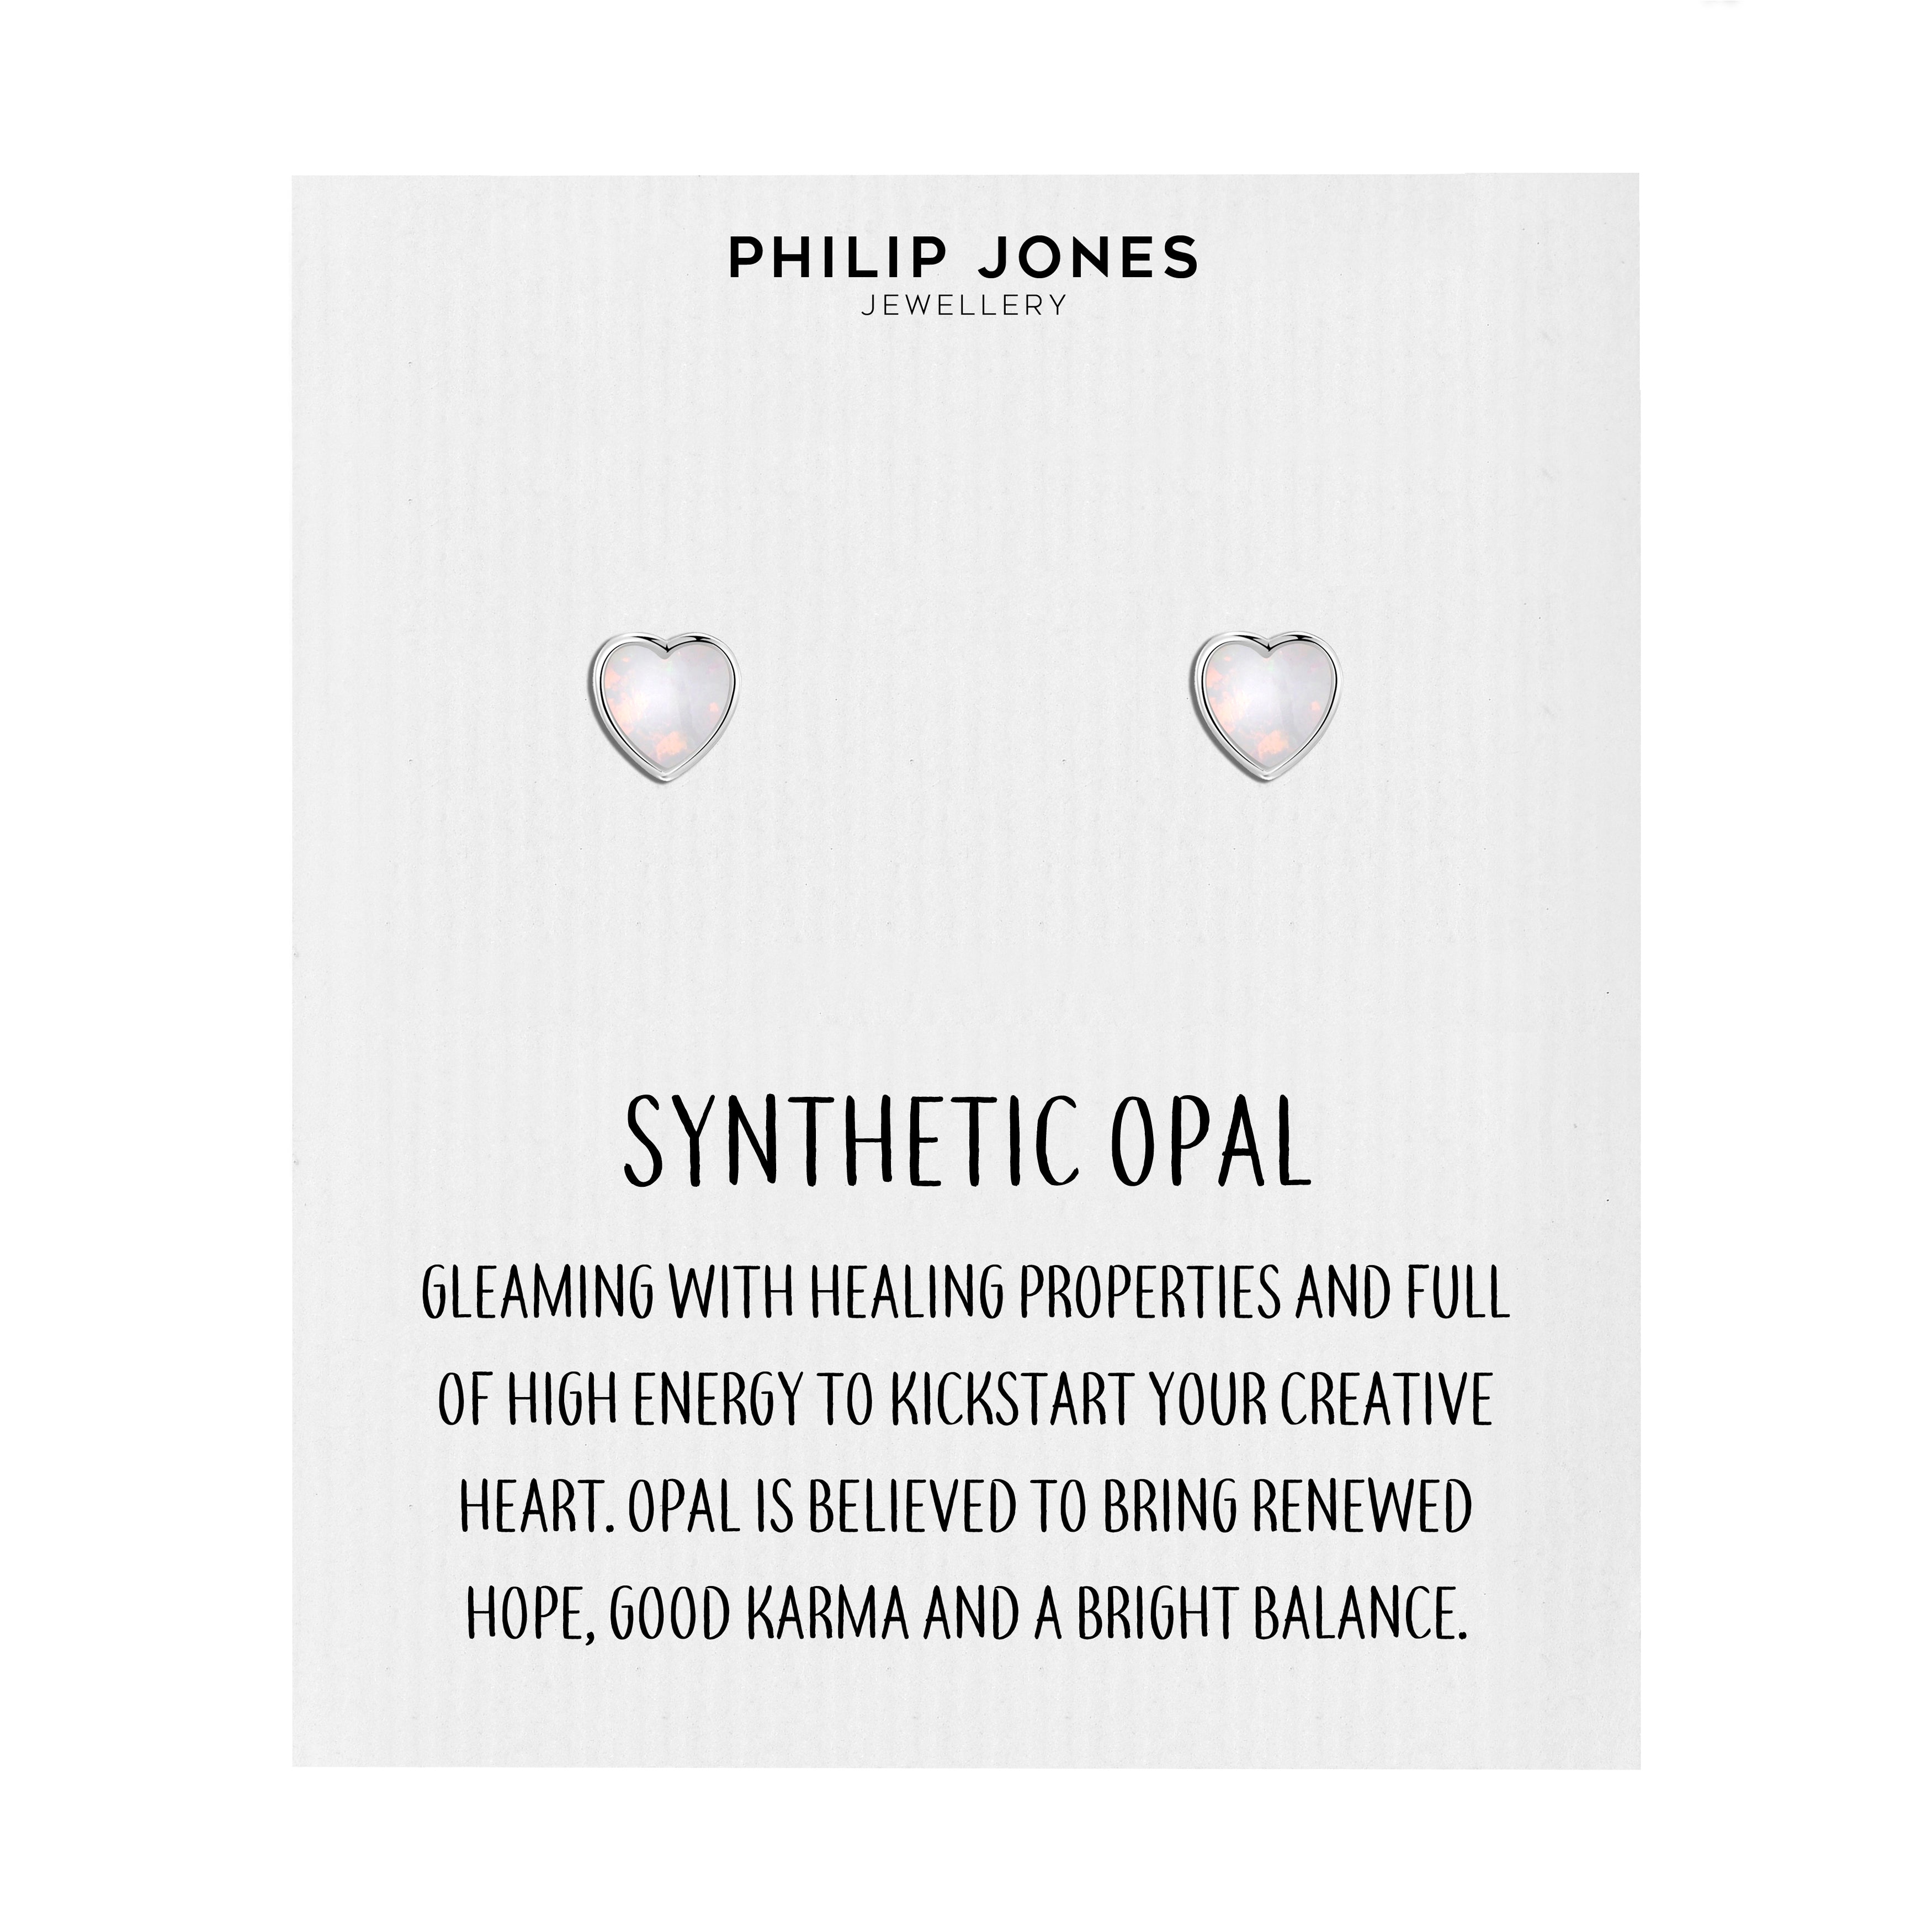 Synthetic White Opal Heart Stud Earrings with Quote Card by Philip Jones Jewellery